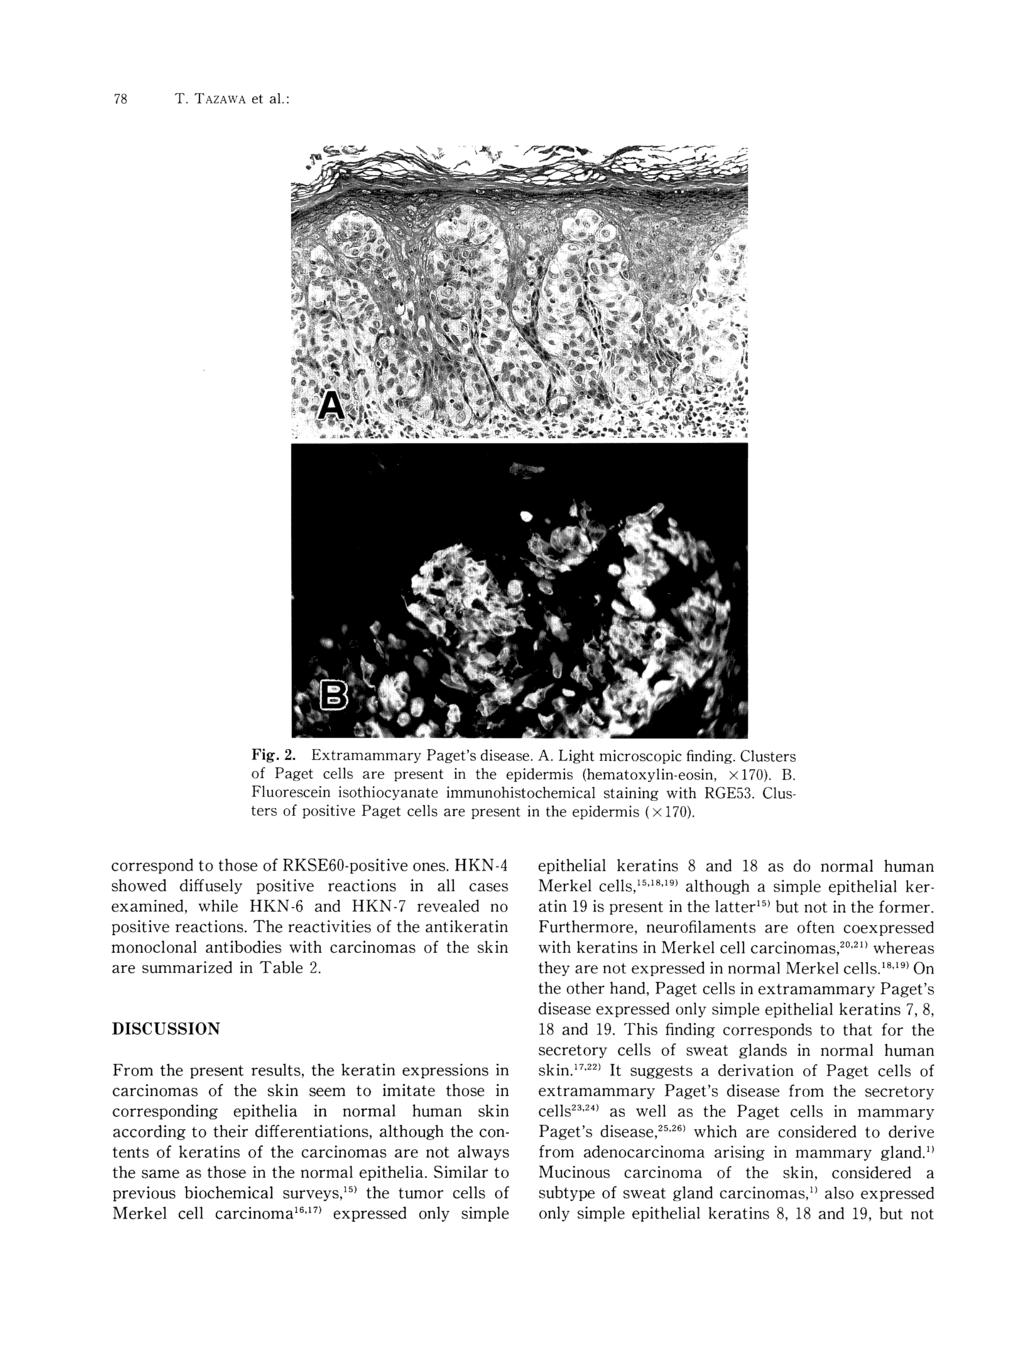 78 T. TAZAWA et a1.: Fig. 2. Extramammary Paget's disease. A. Light microscopic finding. Clusters of Paget cells are present in the epidermis (hematoxylin-eosin, x 170). B.